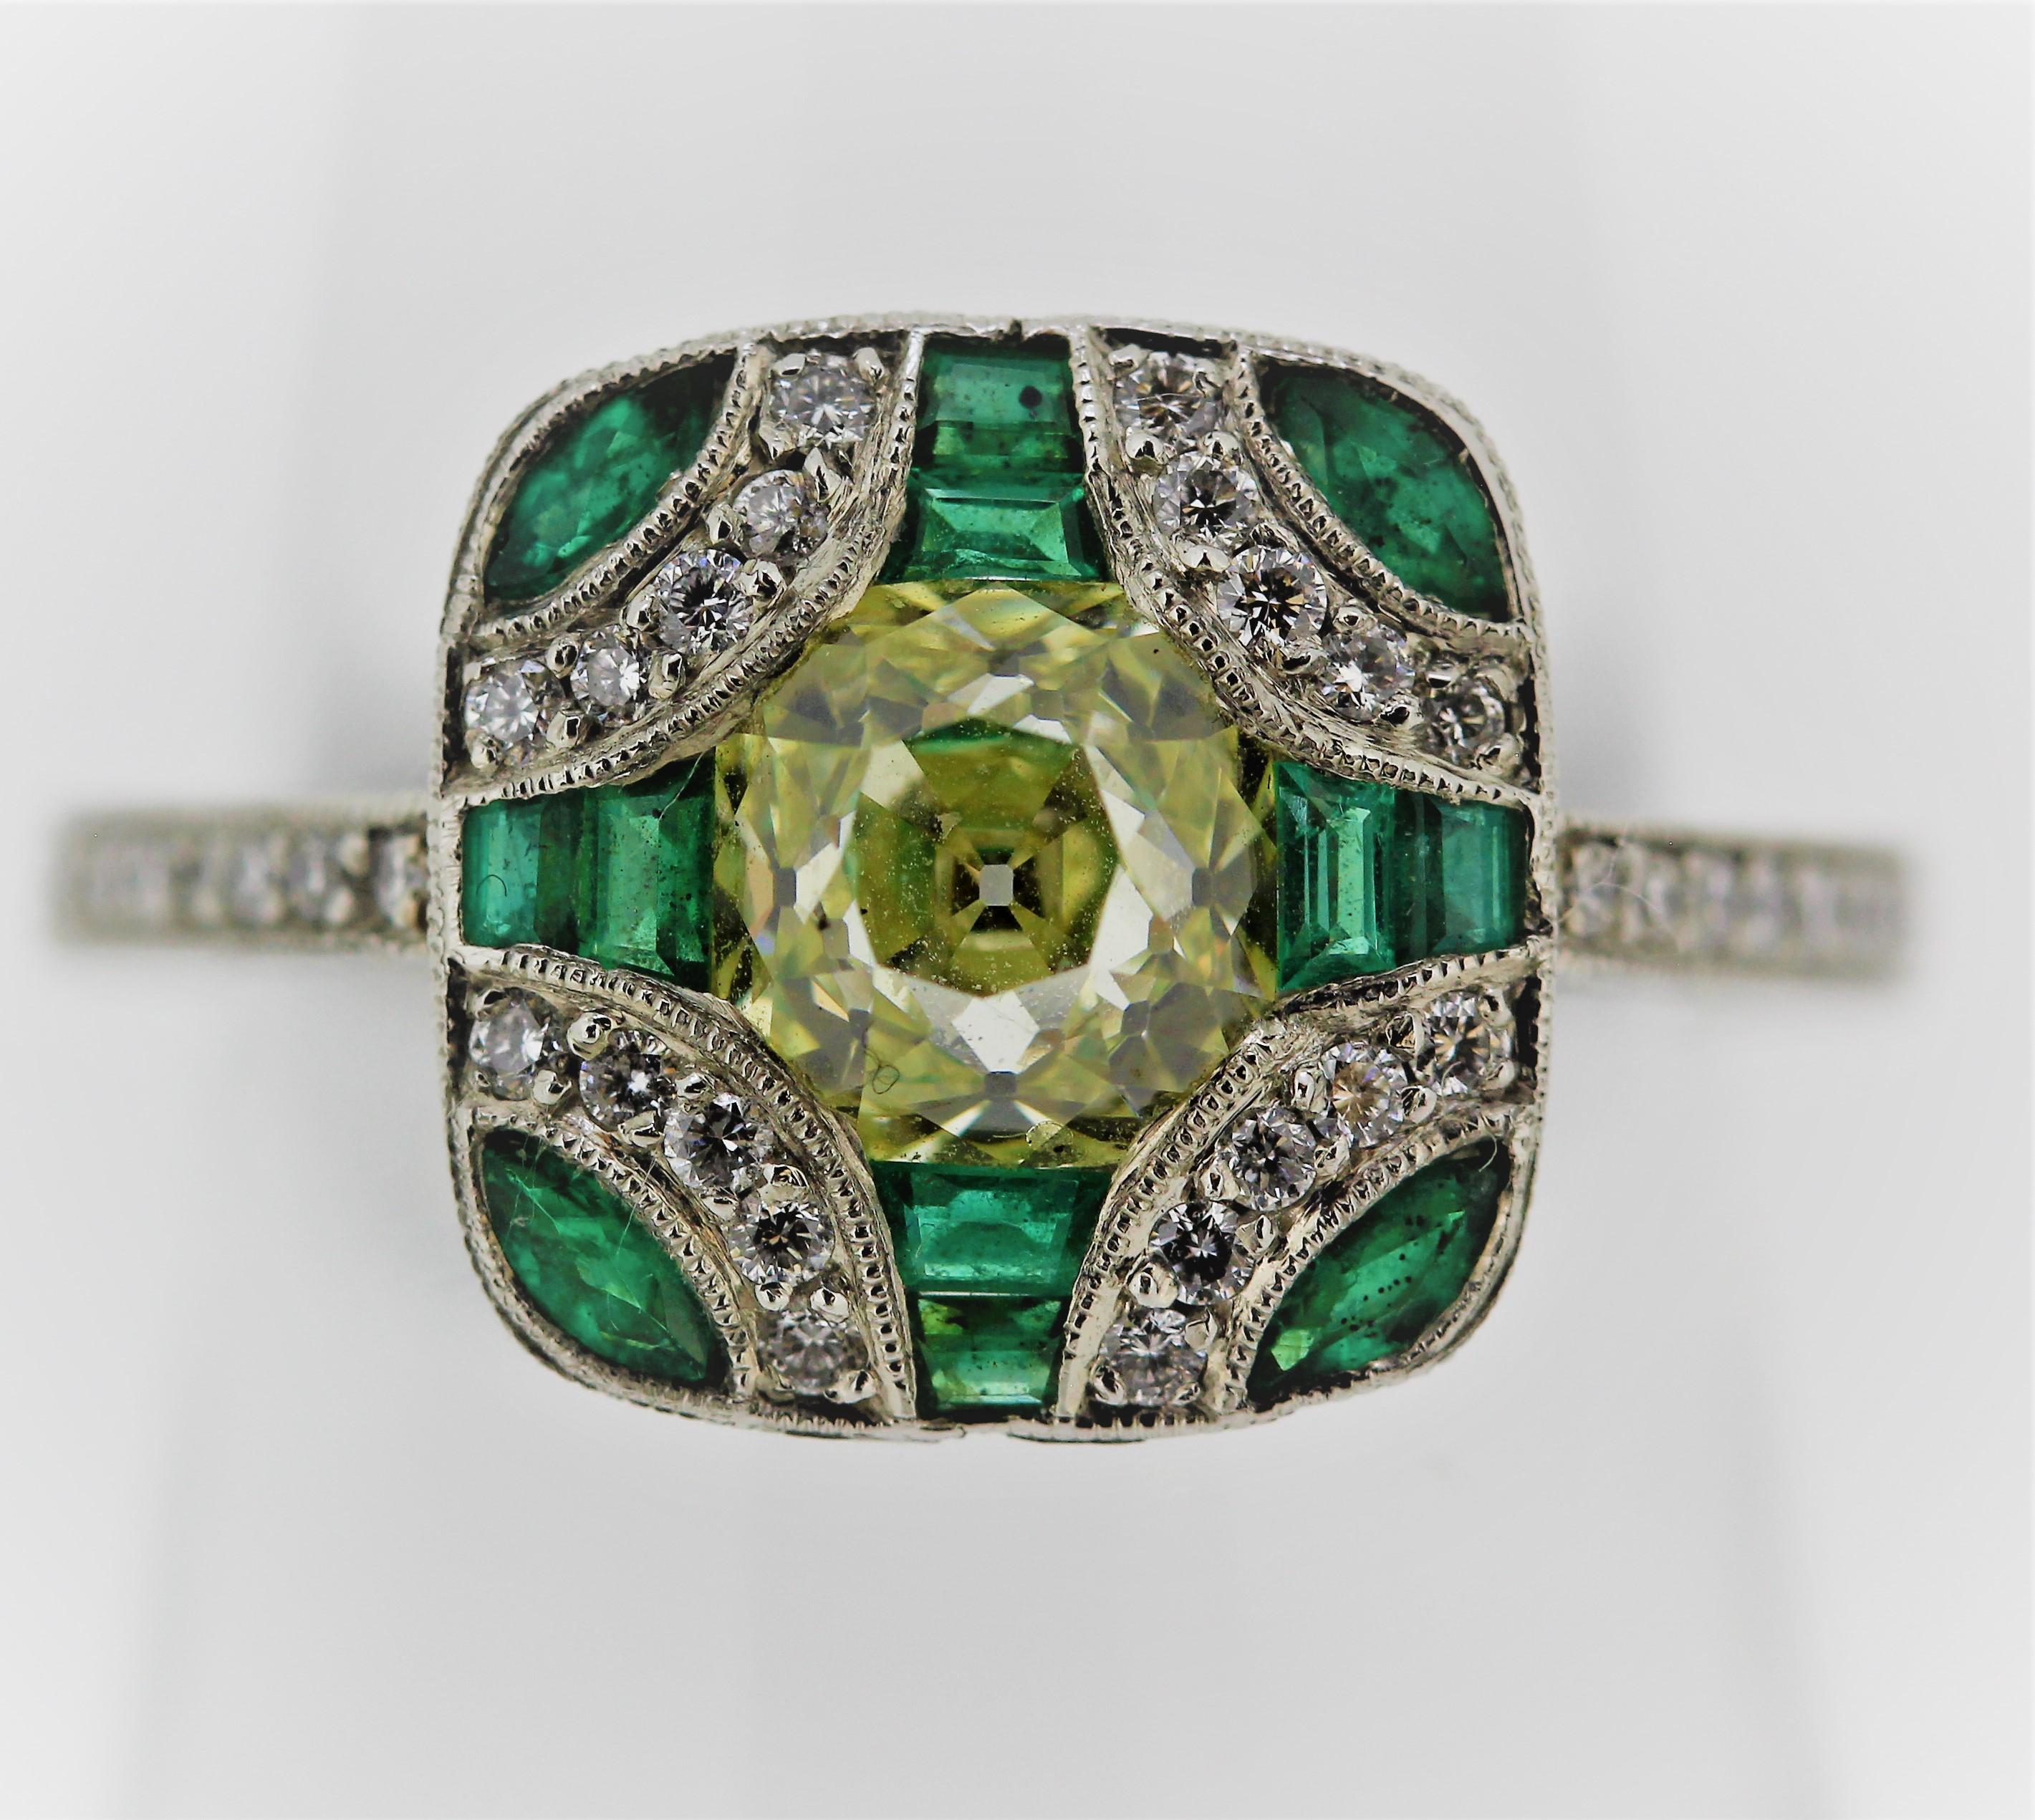 Women's Antique Edwardian Style Fancy Yellow Old Mine Cut Diamond and Emerald Ring For Sale